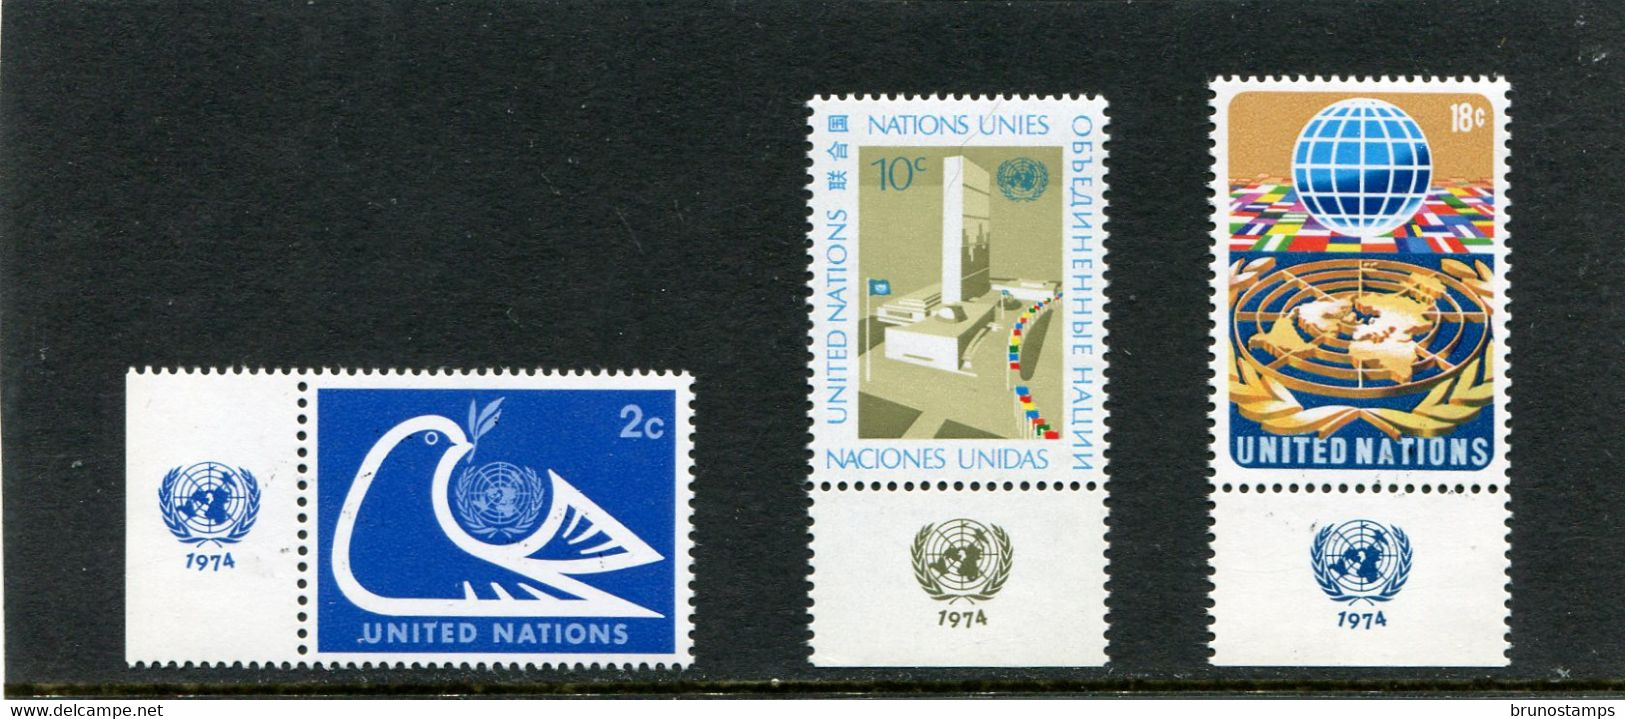 UNITED NATIONS - NEW YORK   - 1974  DEFINITIVE   SET  WITH TABS  MINT NH - Unused Stamps